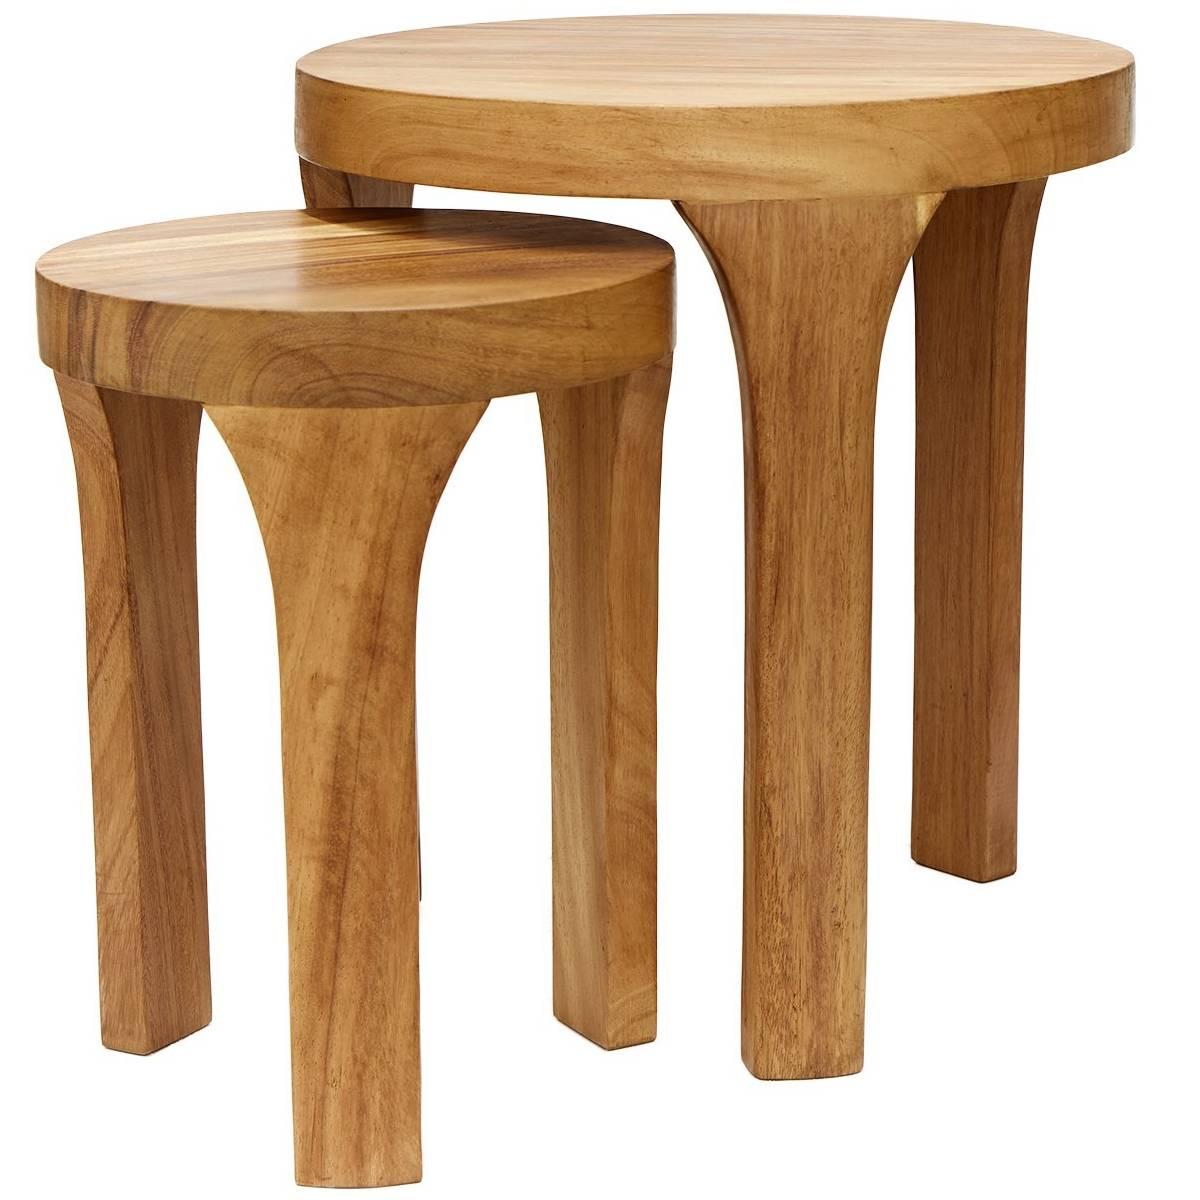 Set of Two Handcrafted Marcelo Centre Tables, Tropical Parota Wood